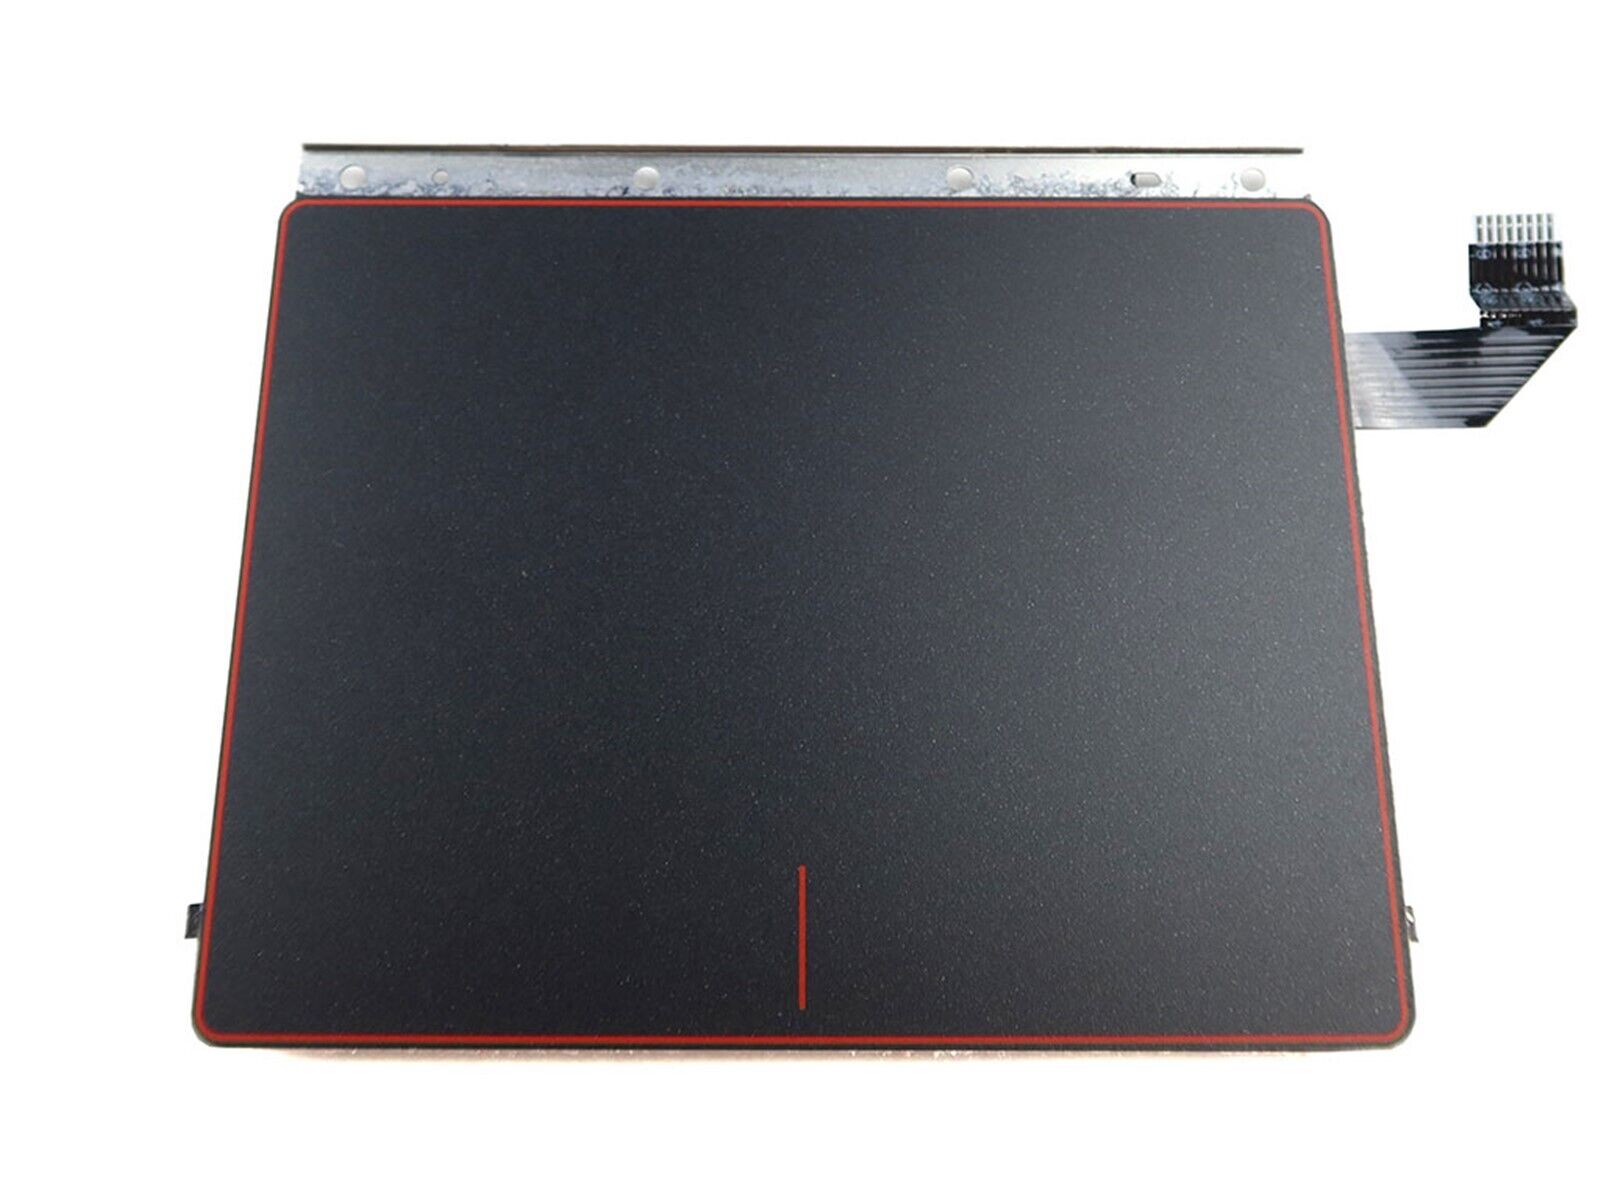 DELL G3 15 3500 SERIES LAPTOP TOUCHPAD ASSEMBLY WITH CABLE BLACK AND RED 6PCRH